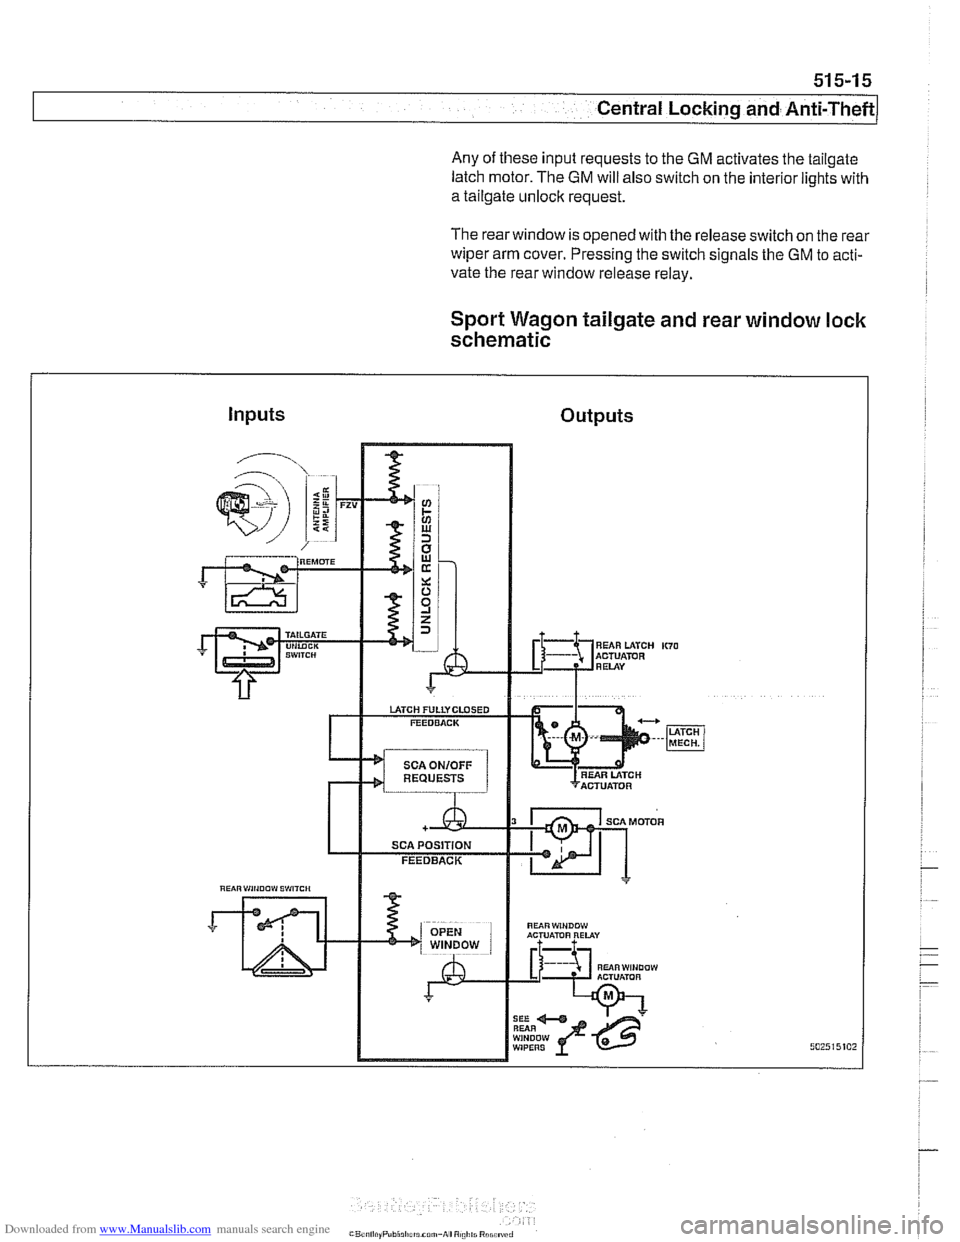 BMW 540i 2001 E39 Workshop Manual Downloaded from www.Manualslib.com manuals search engine 
51 5-1 5 
Central Locking and Anti-Theft 
Any  of these input requests to  the GM activates  the tailgate 
latch motor.  The 
GM will also swi